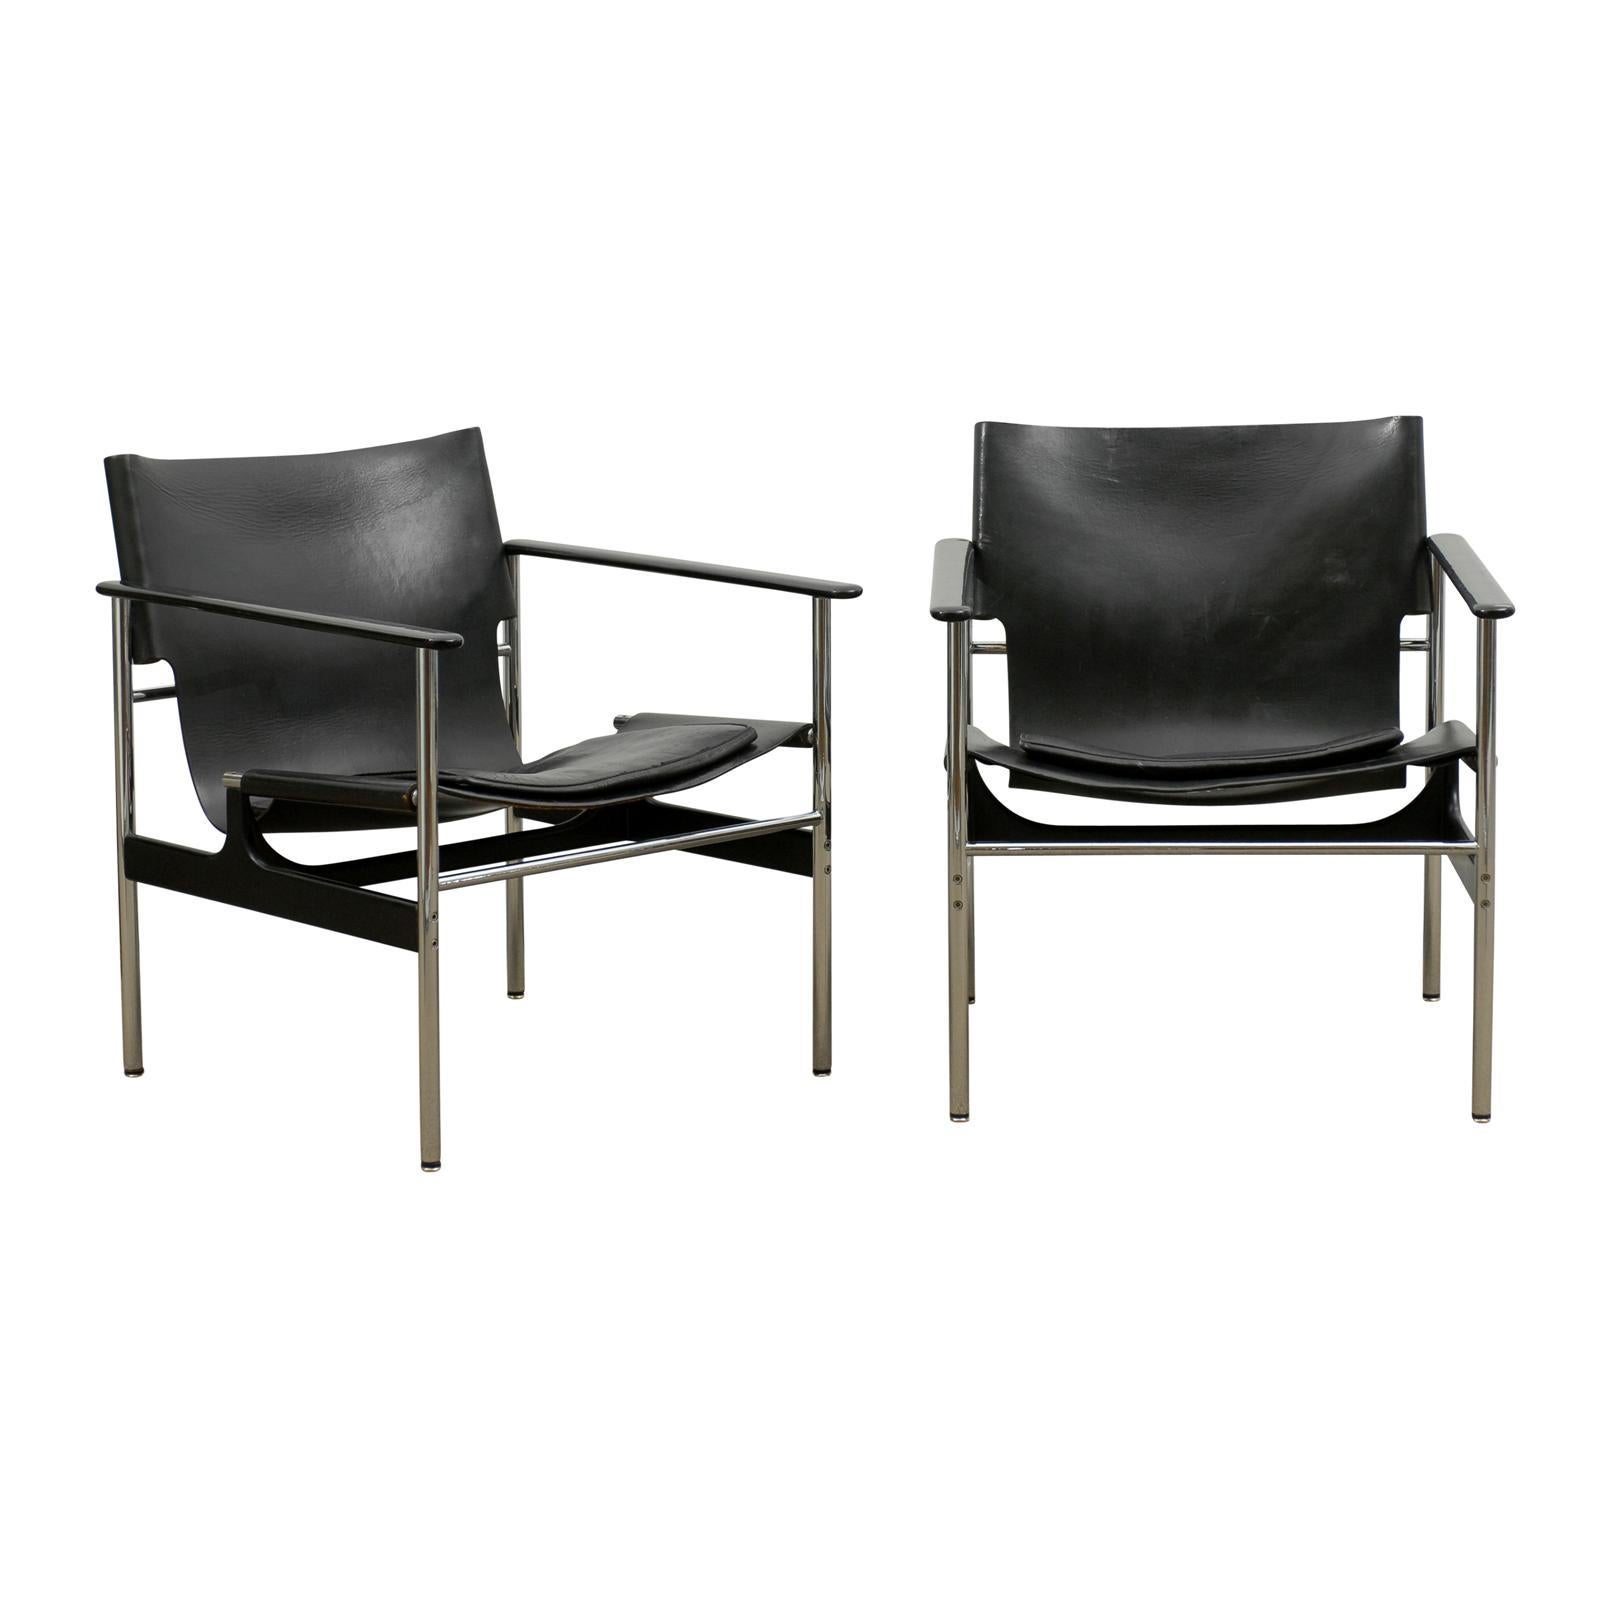 Handsome Pair of Charles Pollock 657 Leather Sling Lounge/Club Chairs by Knoll